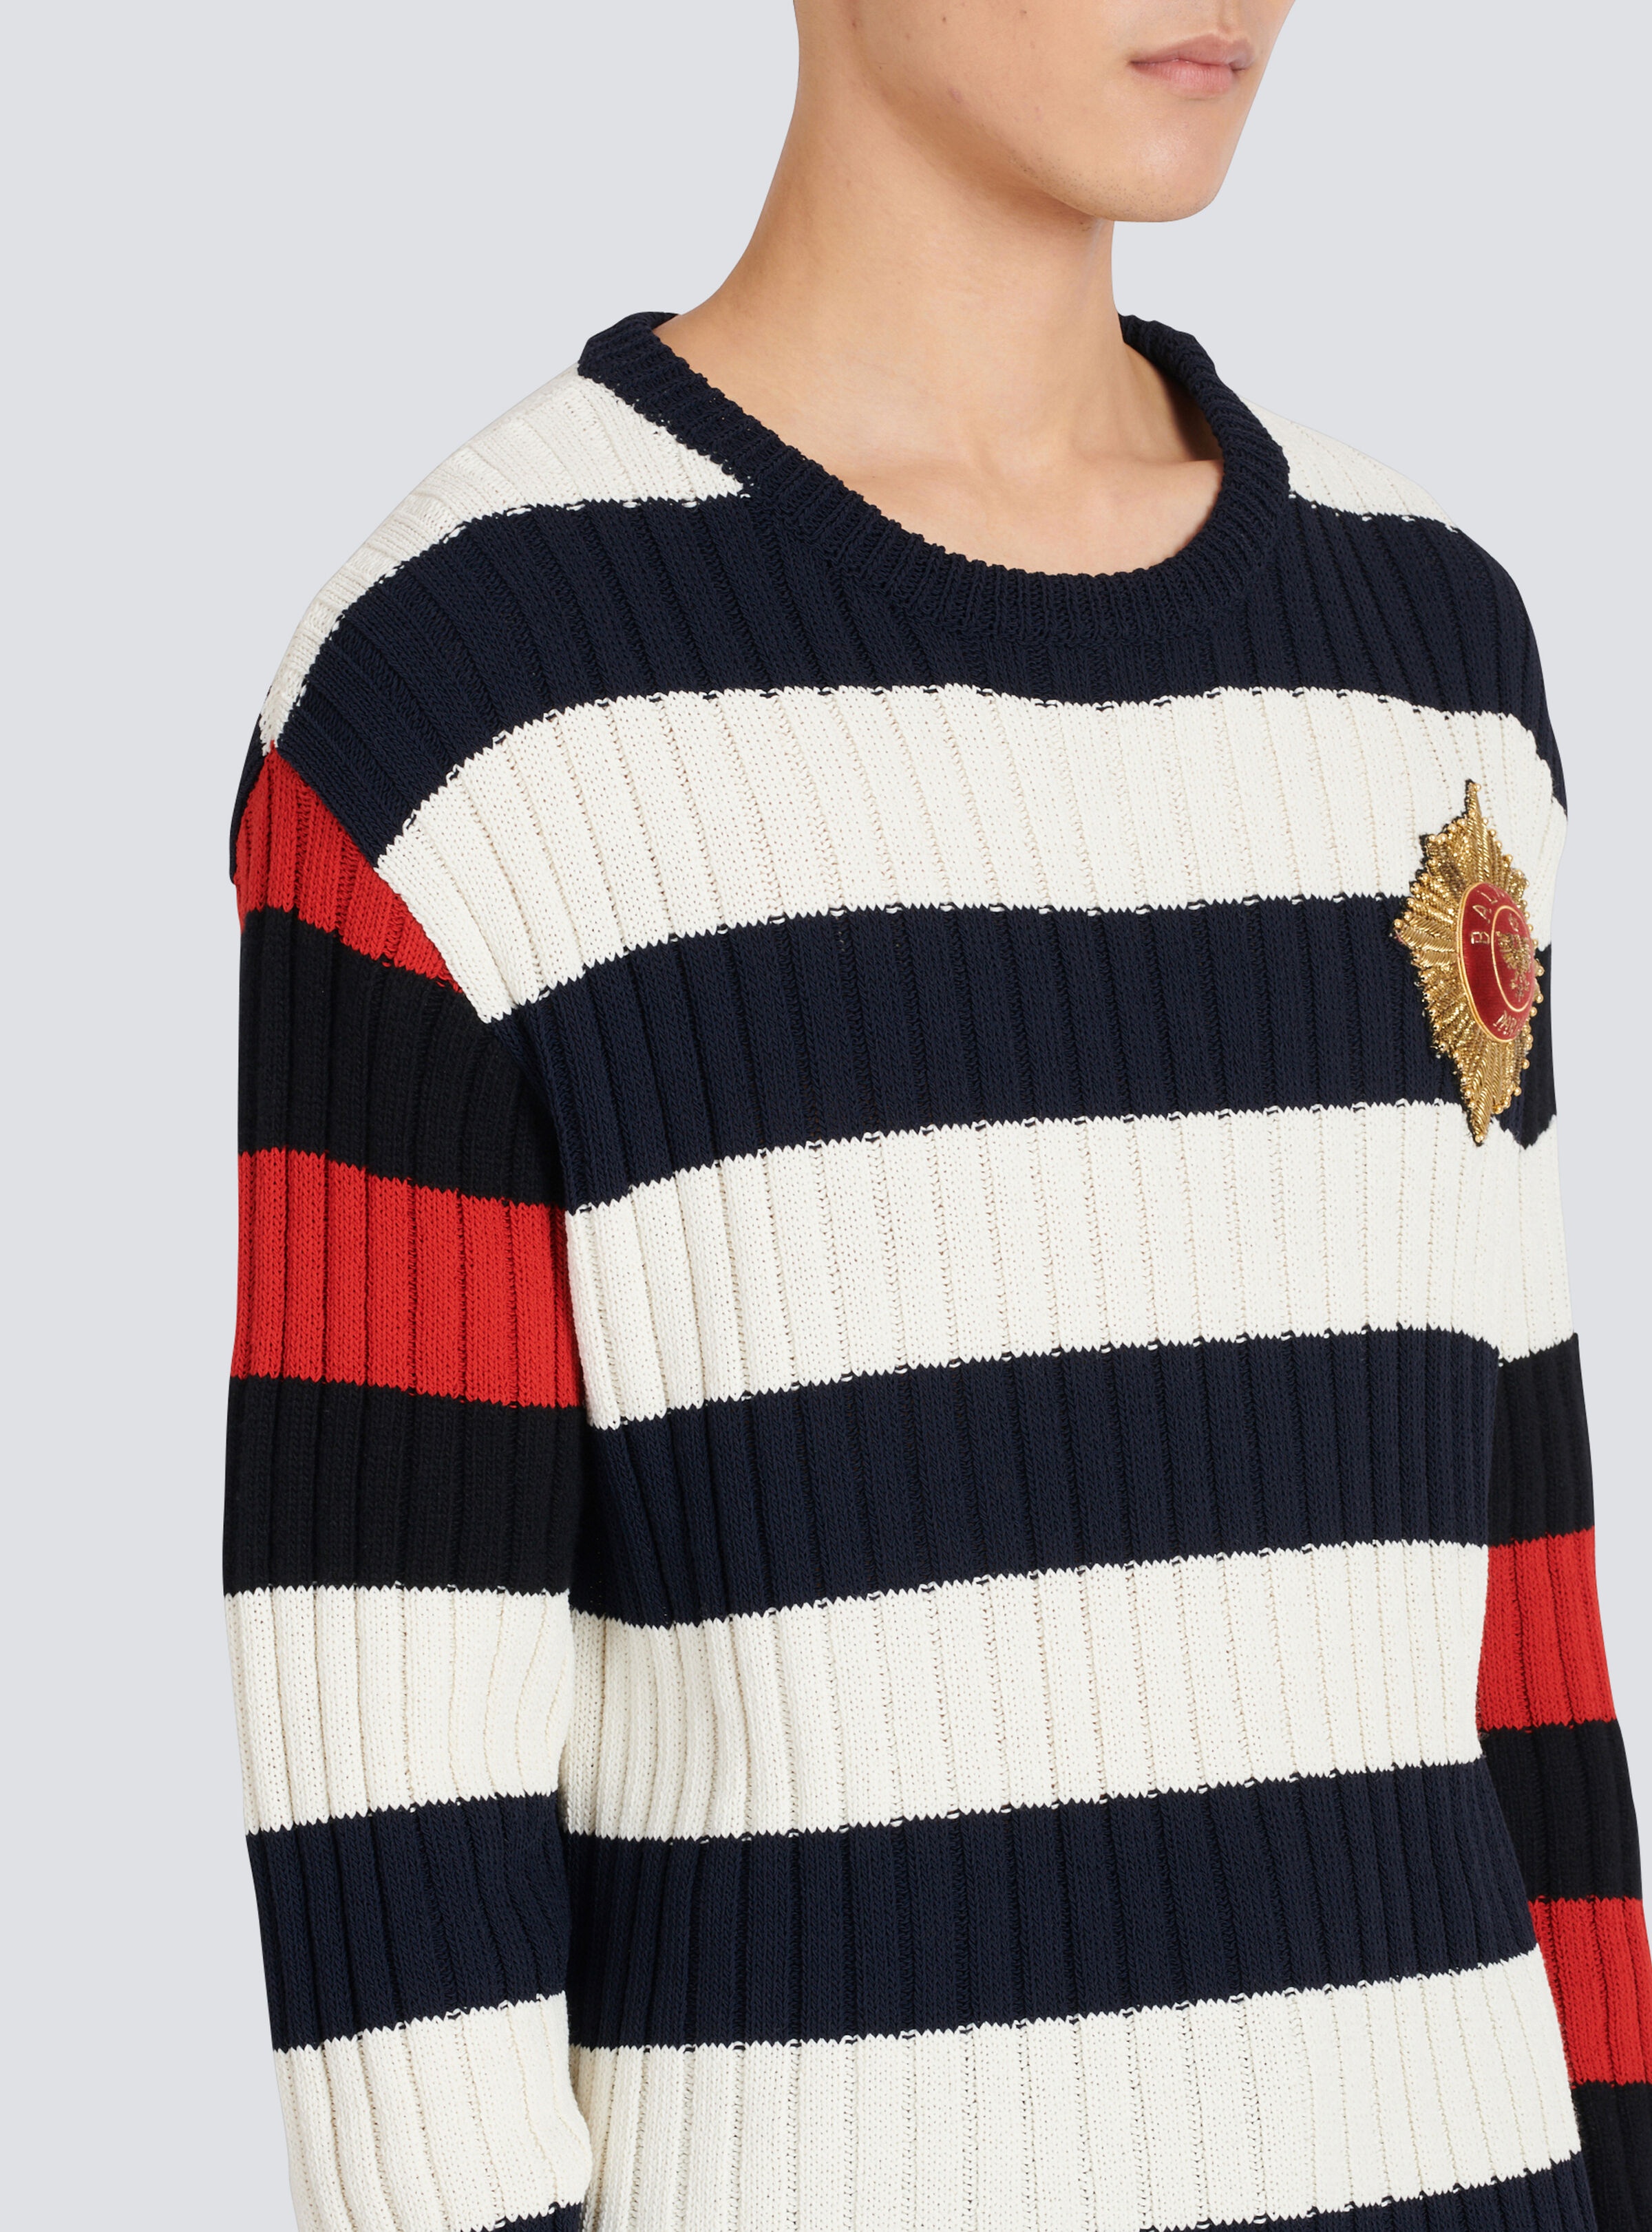 Destroyed nautical sweater - 7